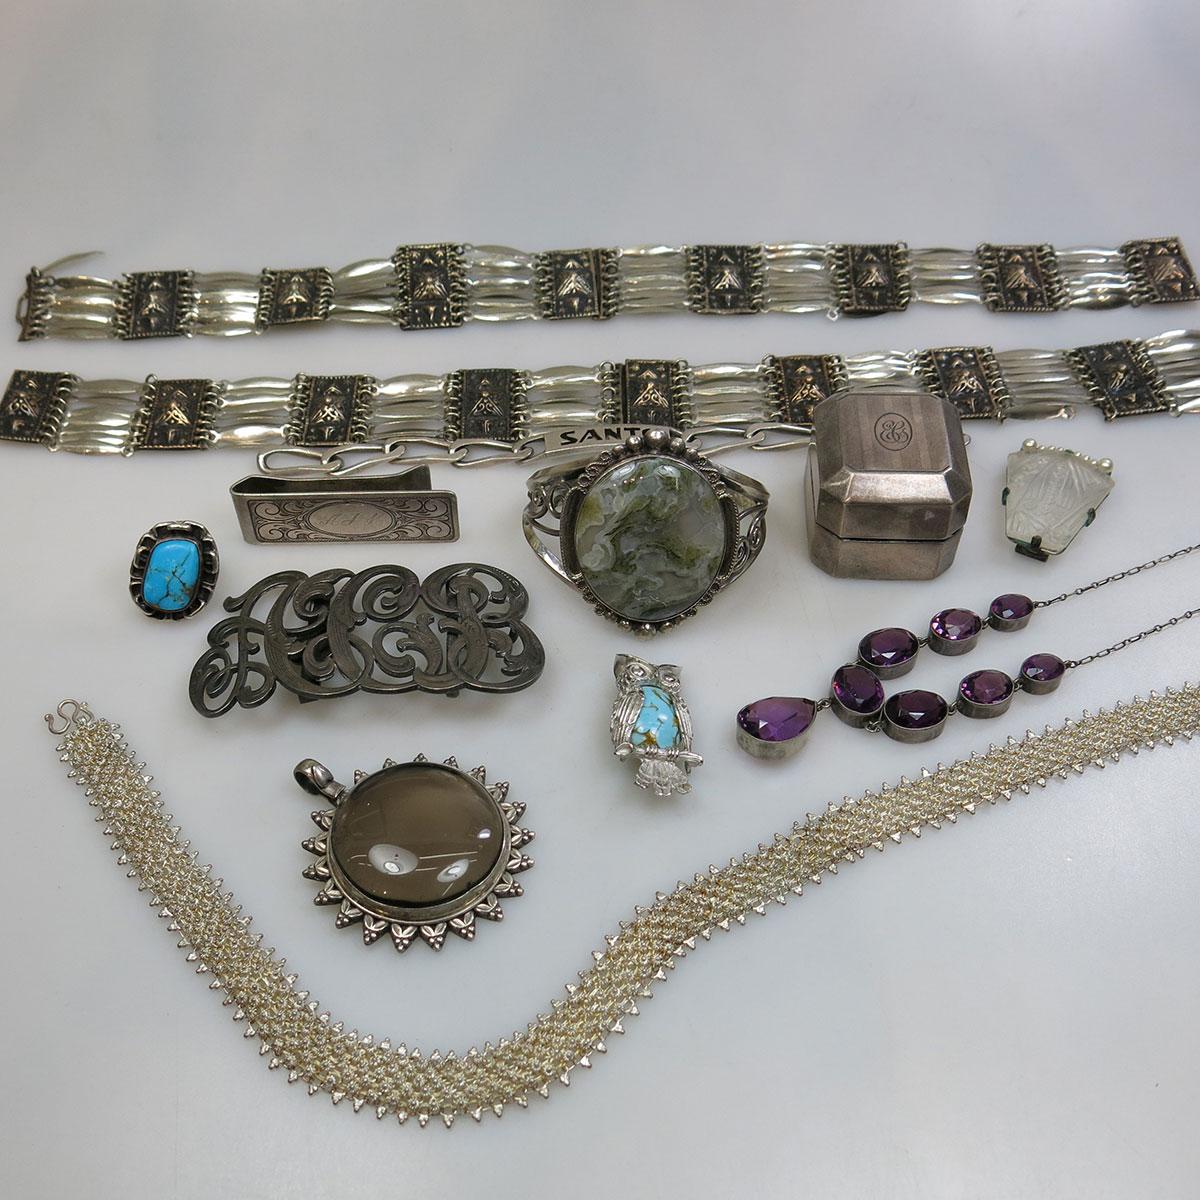 Small Quantity Of Silver and Silver-Plated Jewellery